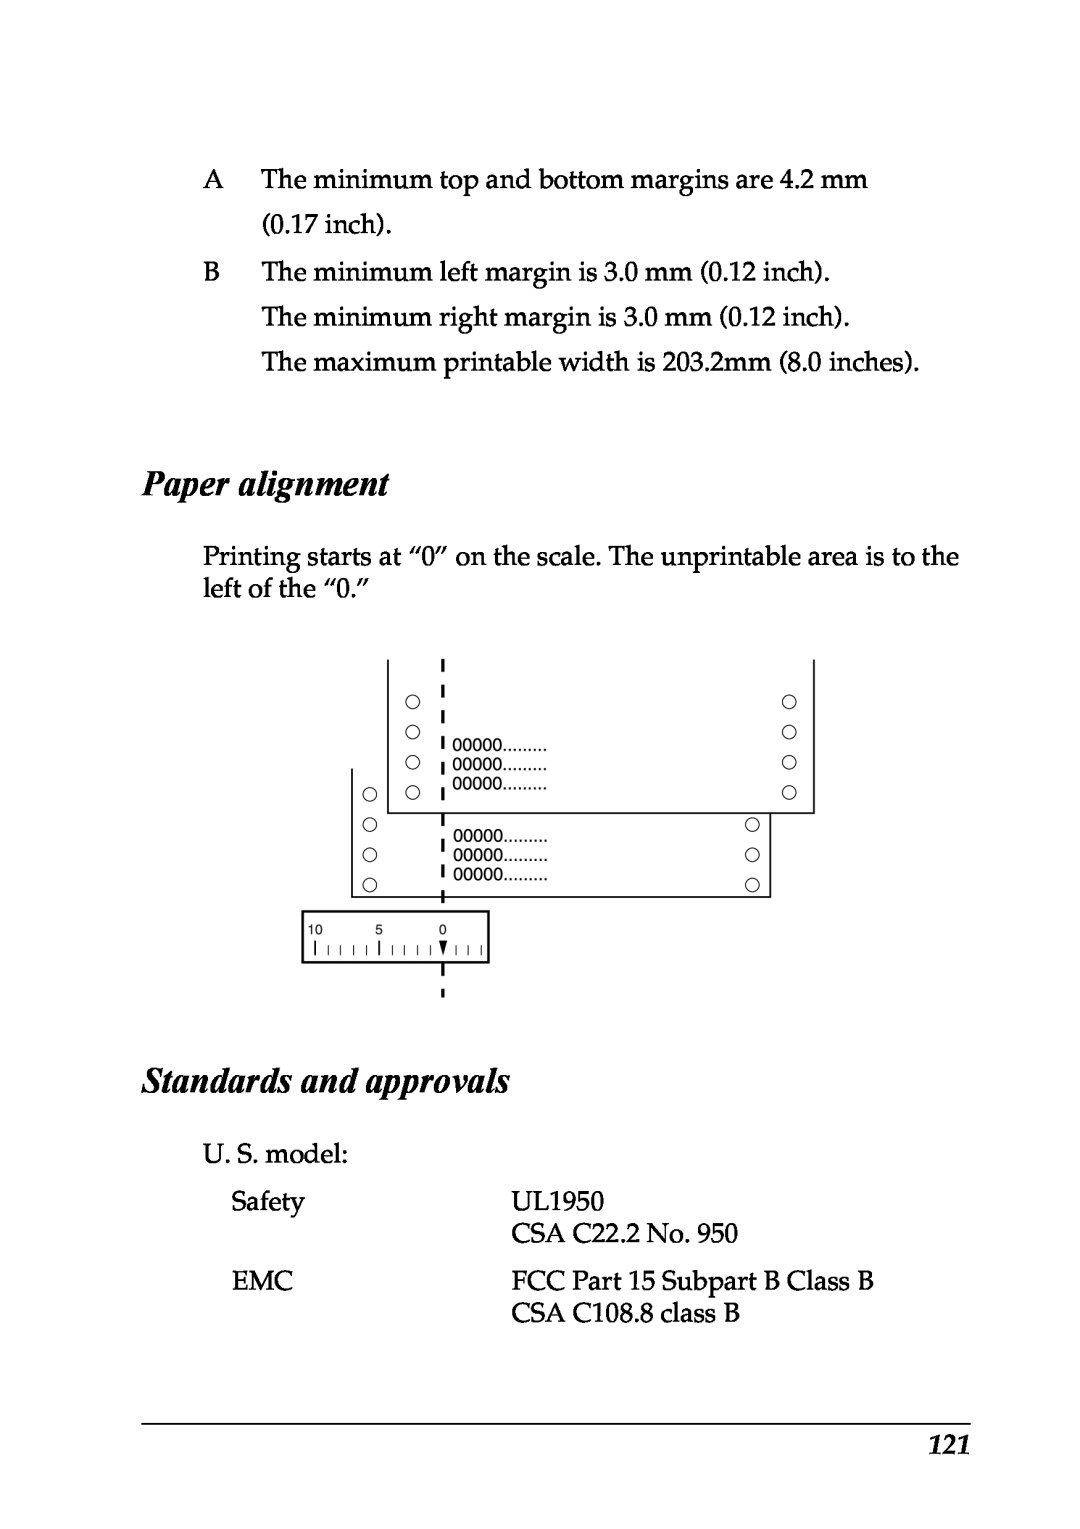 Epson LX-1170 manual Paper alignment, Standards and approvals 